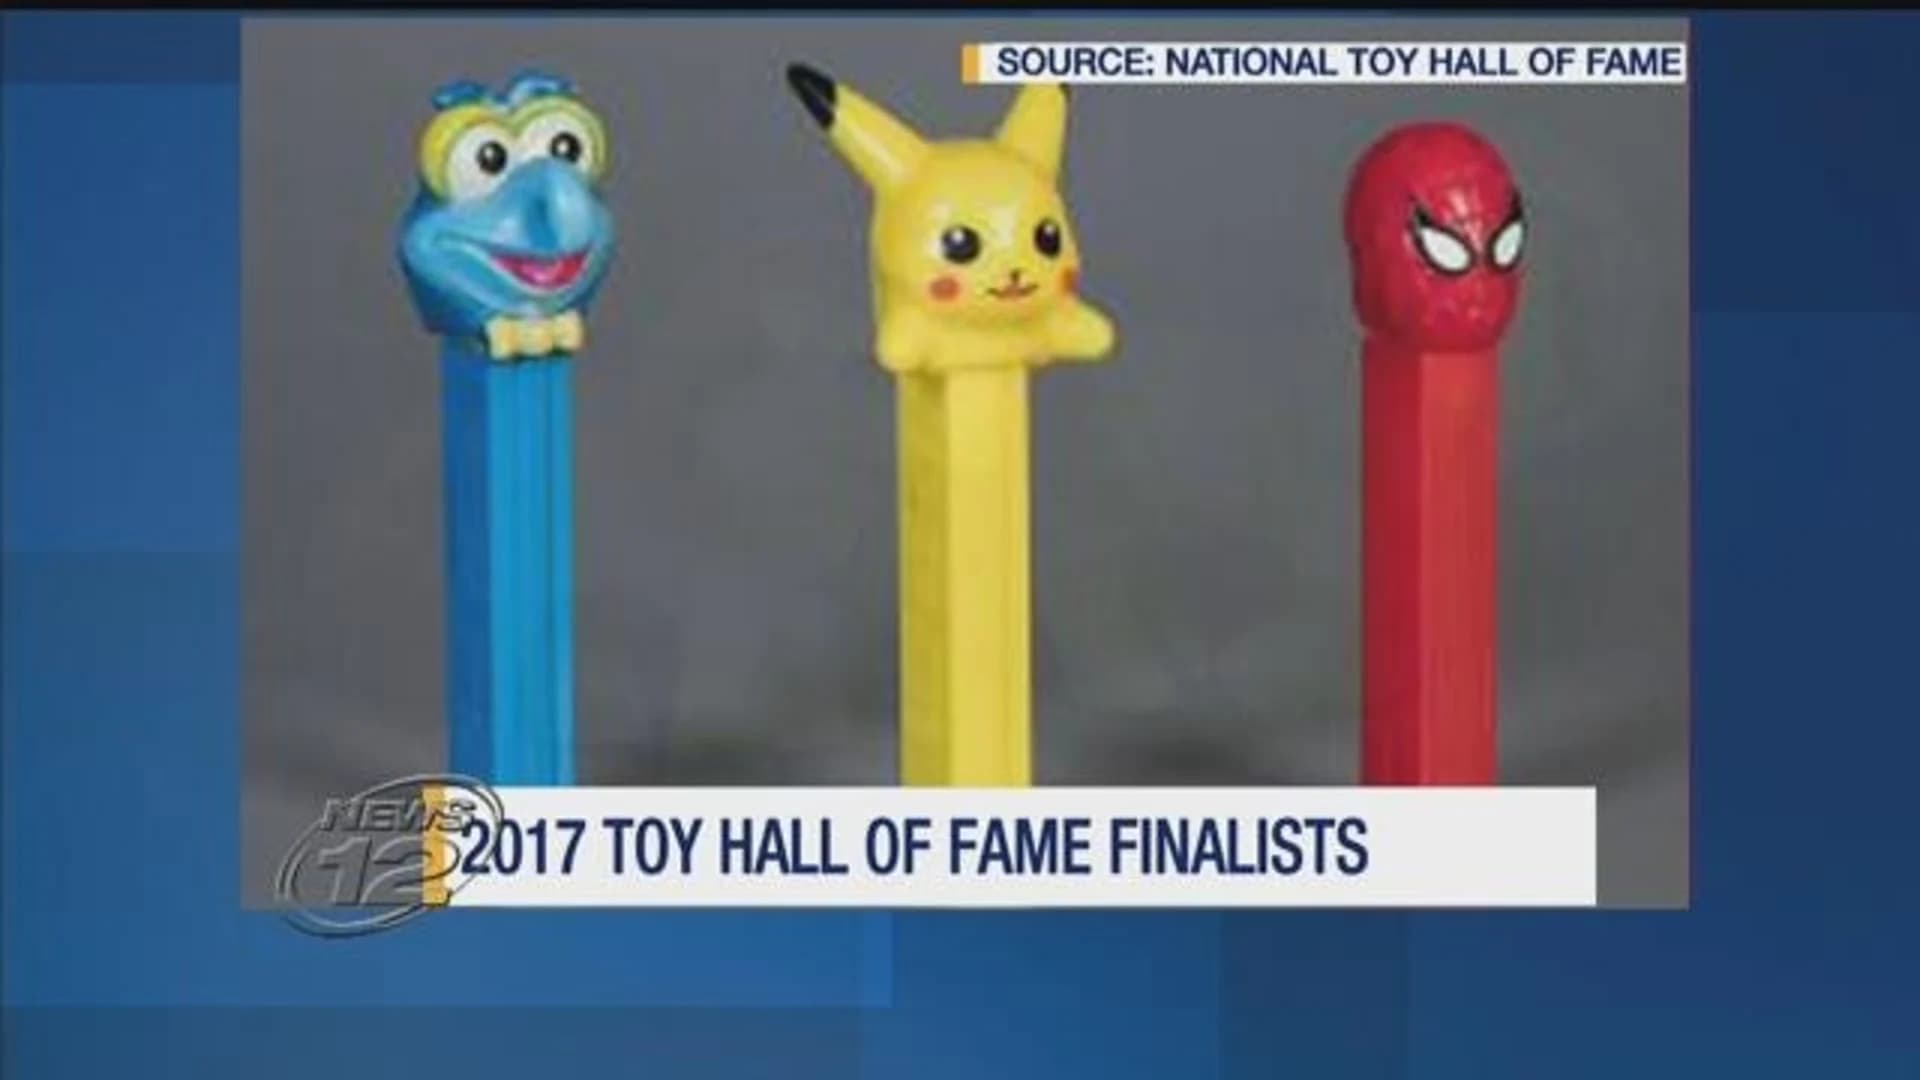 Paper airplane, sand among 12 finalists for Toy Hall of Fame